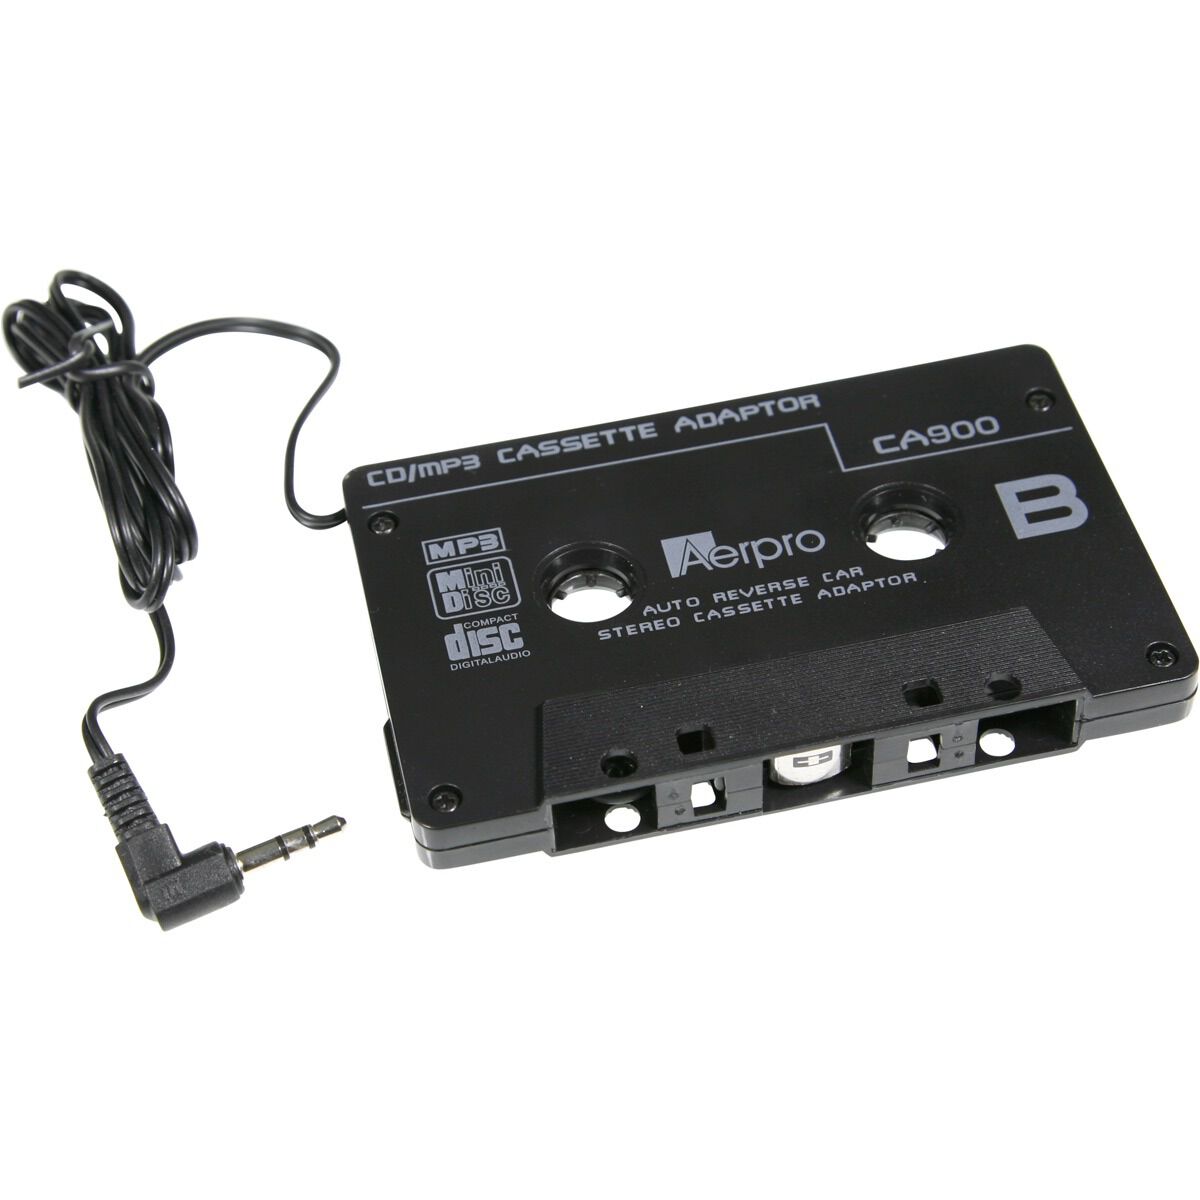  Elook Cassette Aux Adapter Kit for Car, Includes One